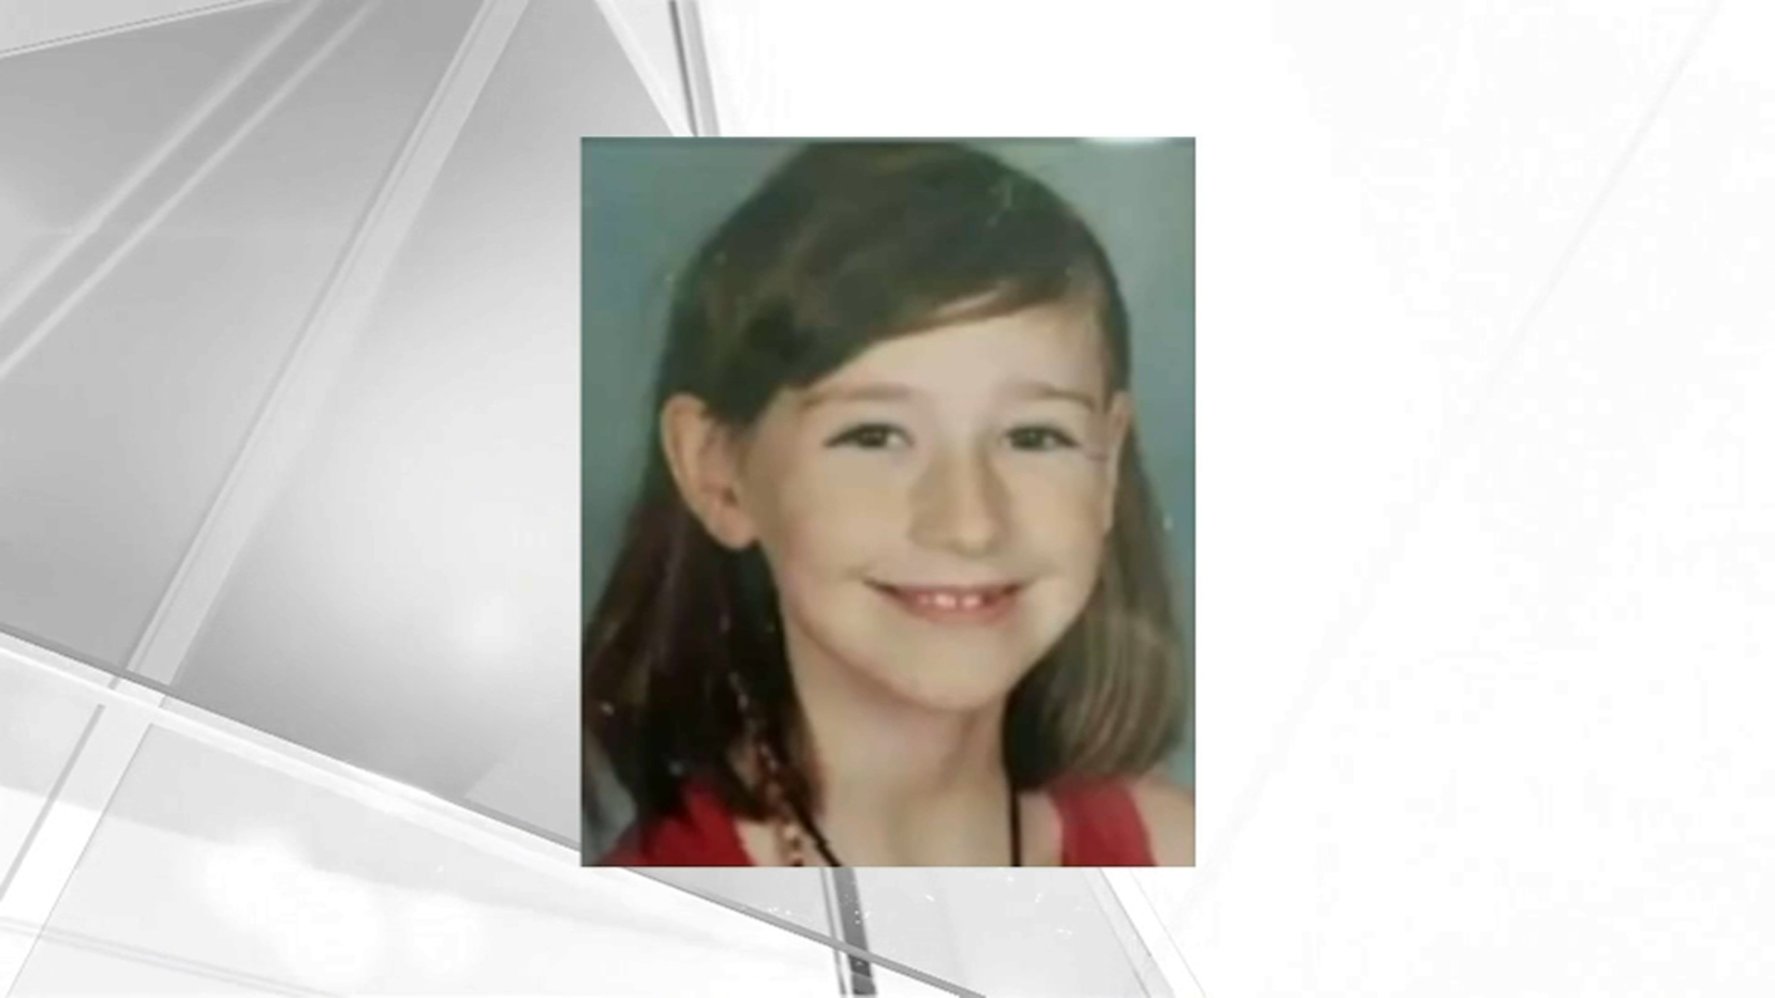 Ashes Of 8 Year Old Killed In Calif Stolen From Father Nbc10